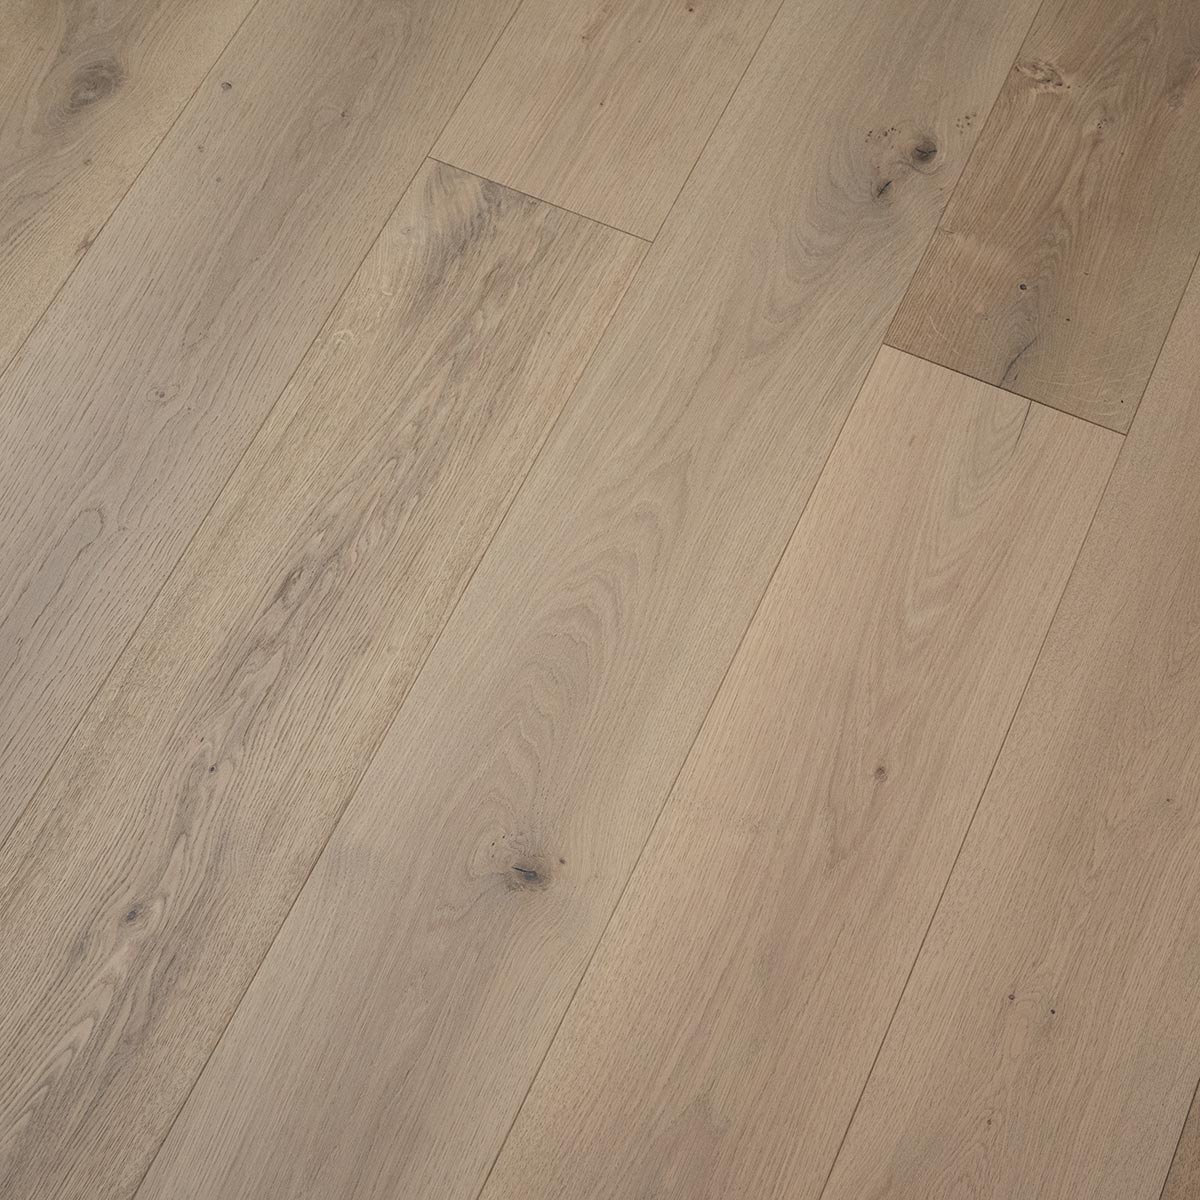 DC203 White Smoked Oak - Engineered wood floor from V4